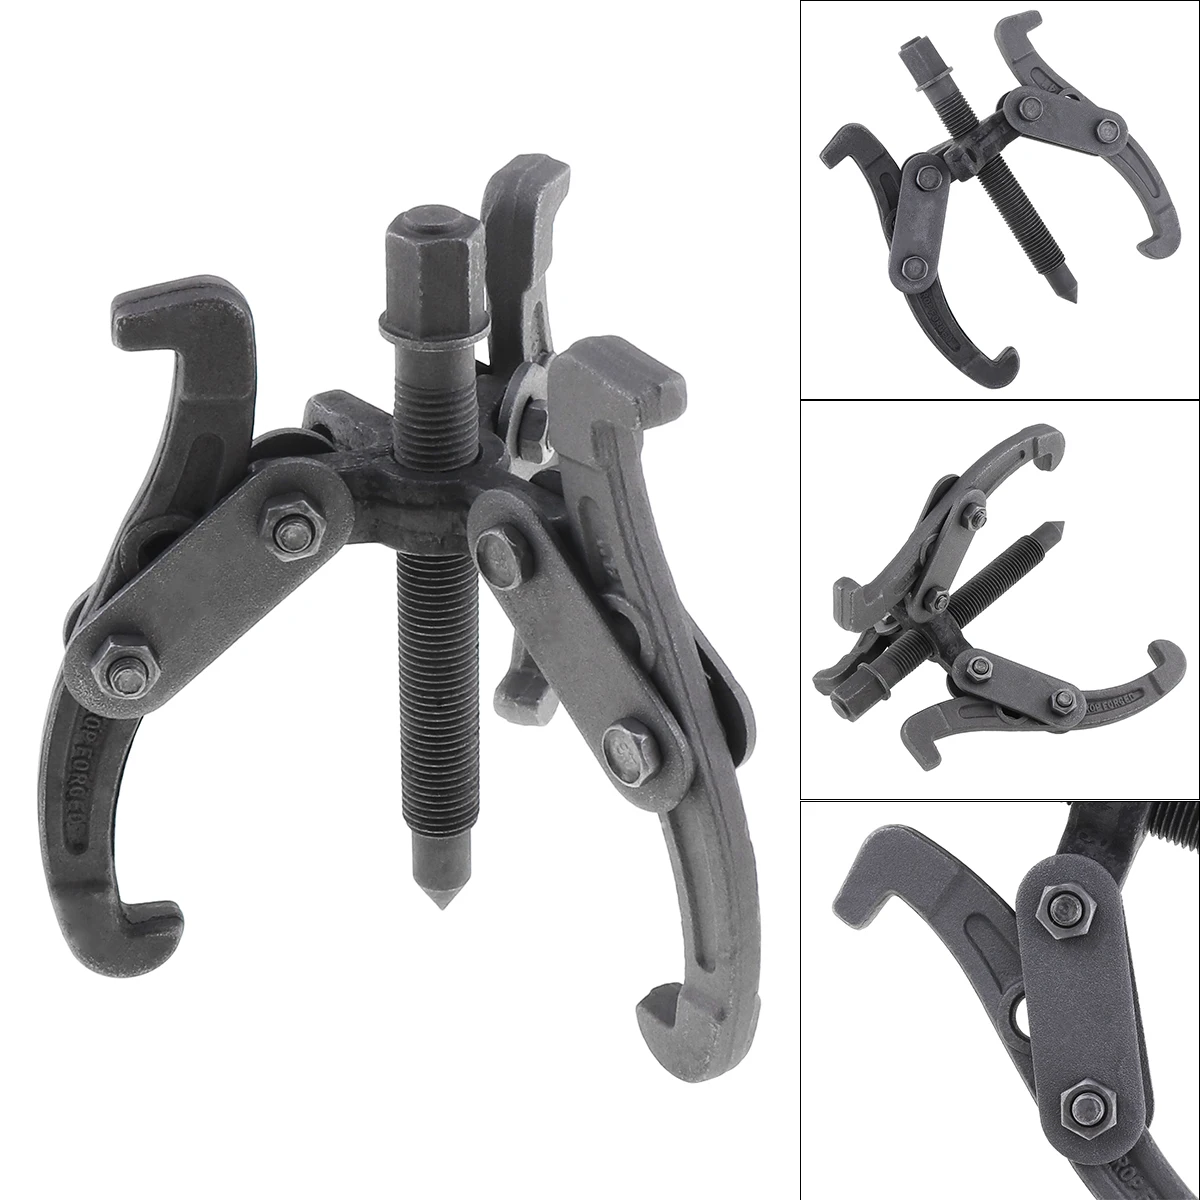 4 Inch Carbon Steel Two Holes Three Puller Separate Lifting Device Repair Auto Mechanic Bearing Puller Manual Tools Three Claws